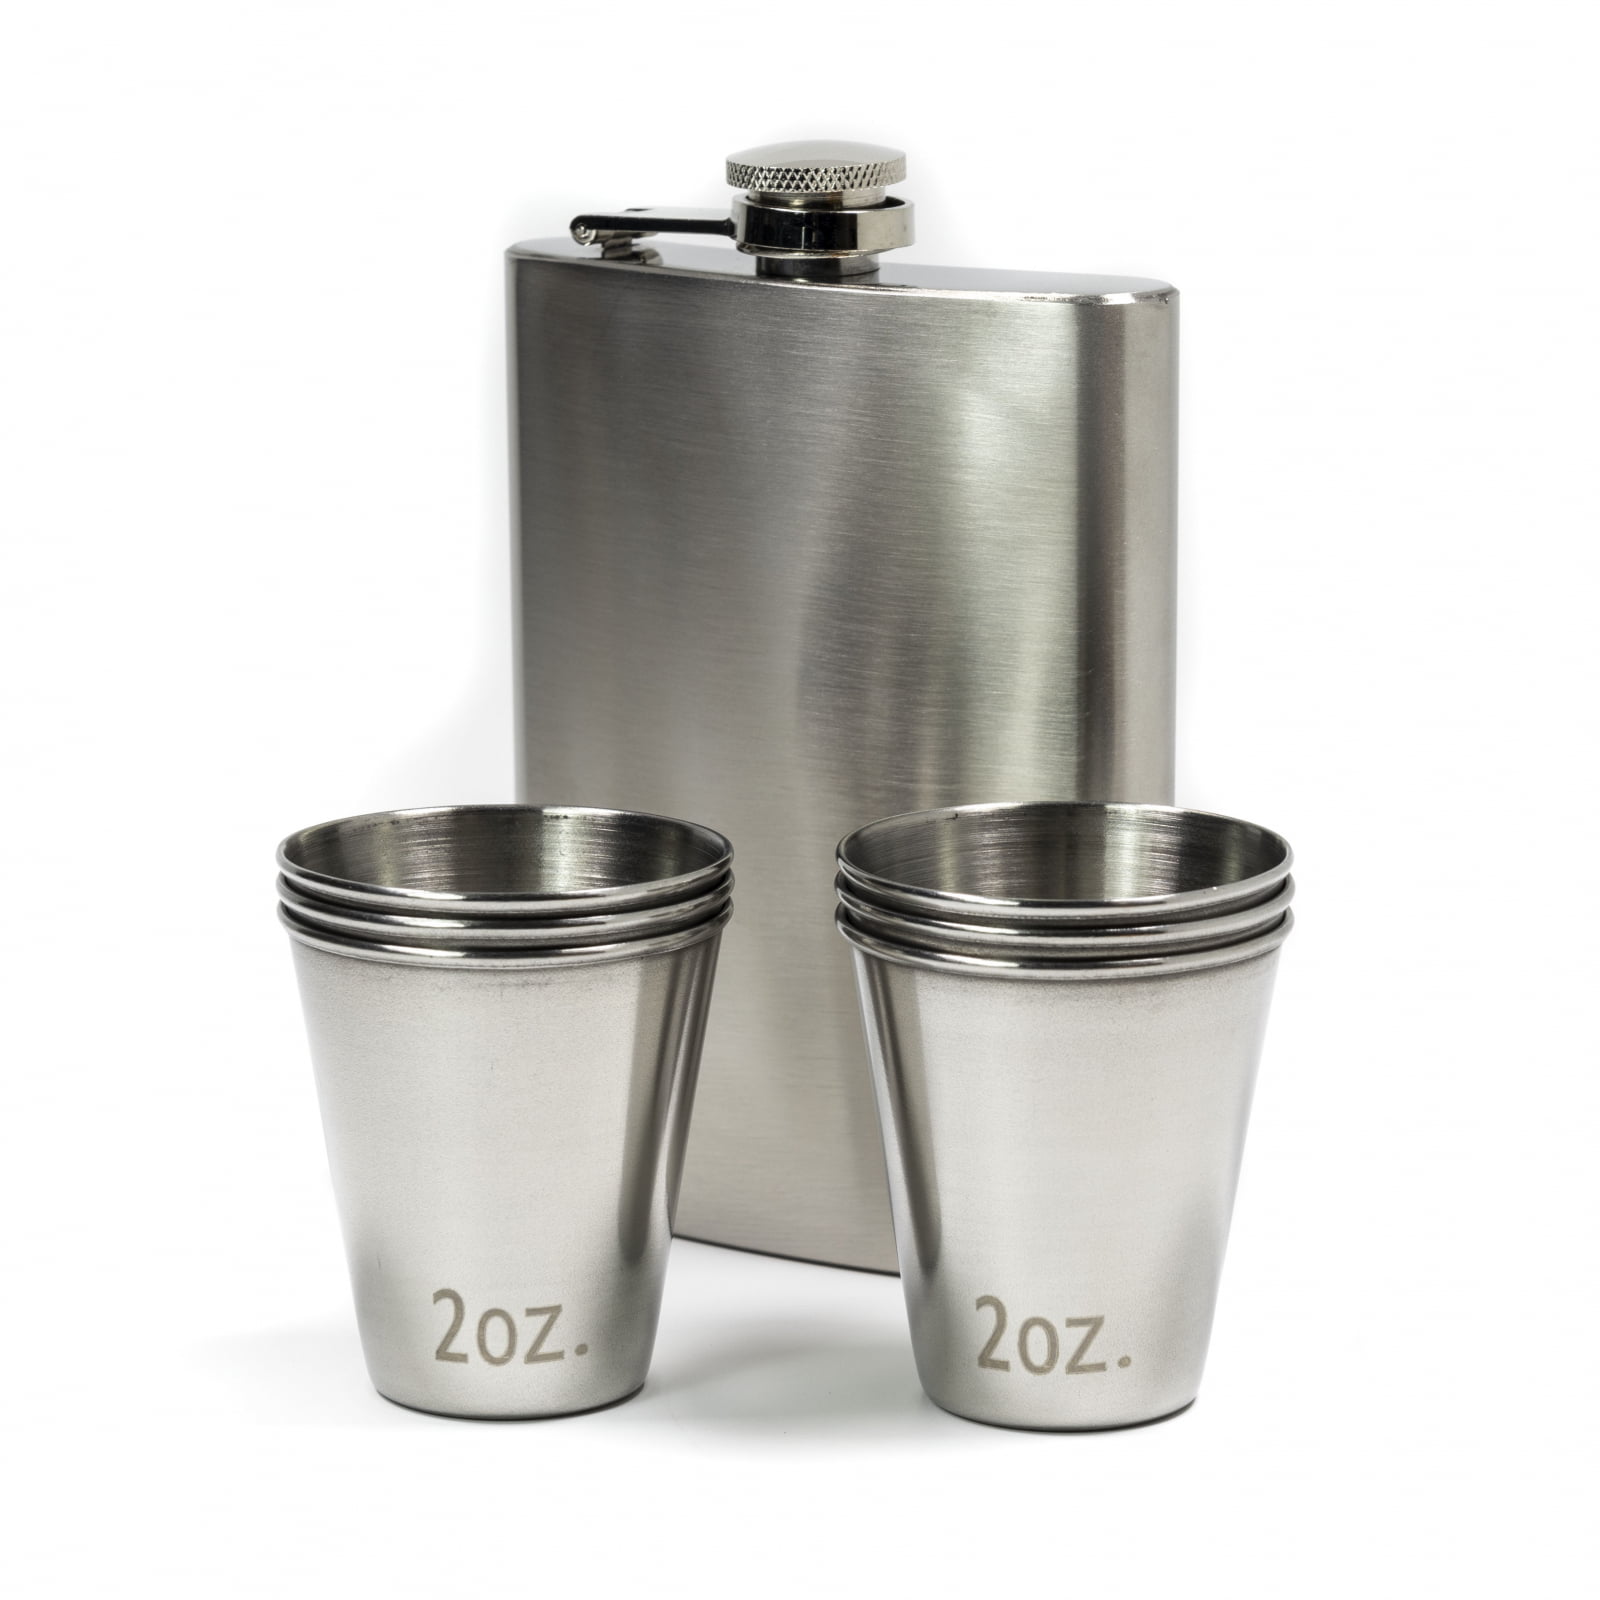 7pc ASR Outdoor Portable Stainless Steel Silver Shot Glasses and Flask Set  - Walmart.com